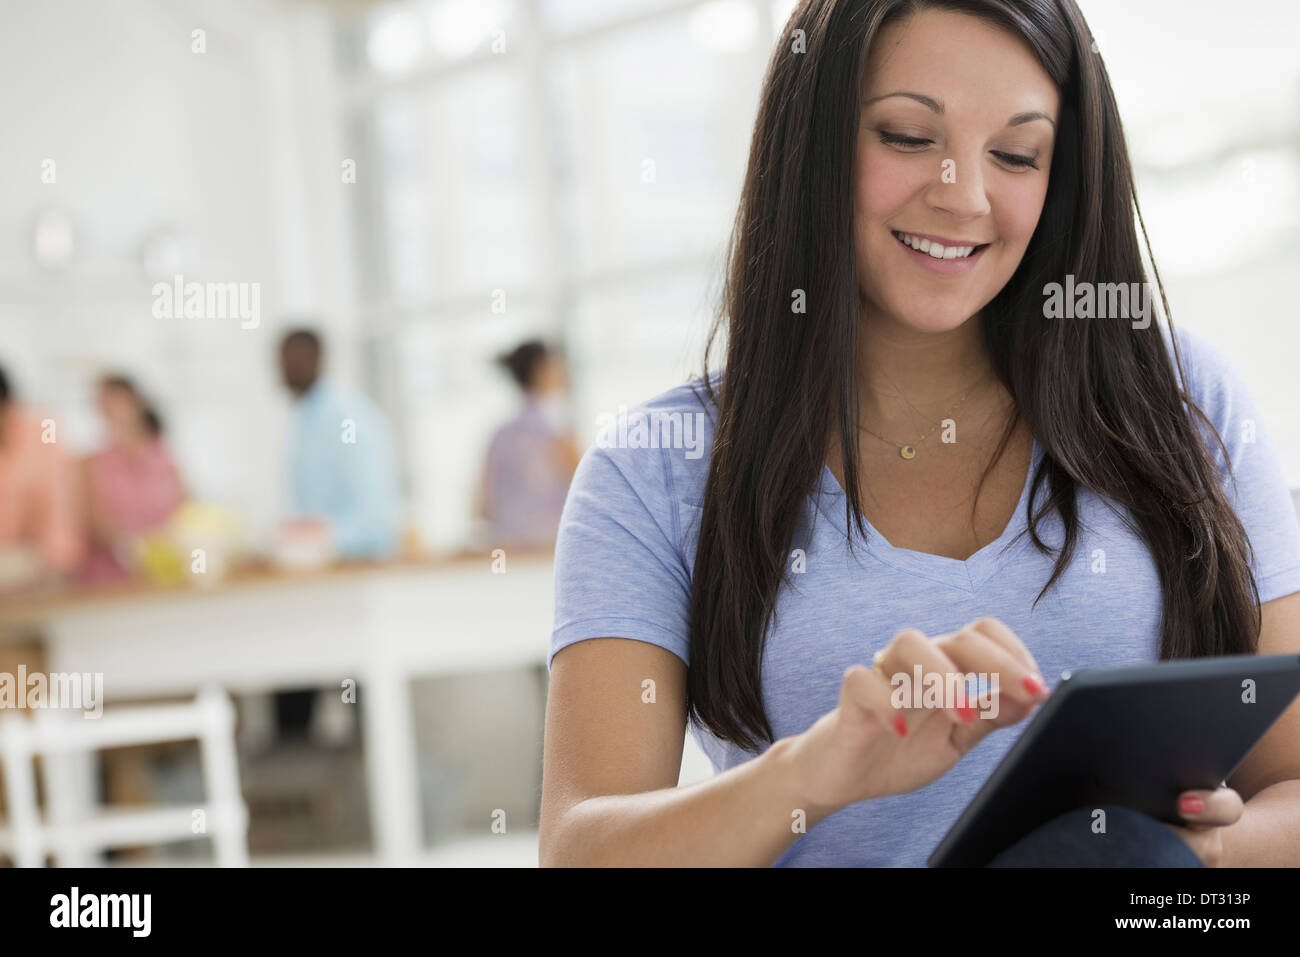 A woman with long black hair using a digital tablet People in the background Stock Photo